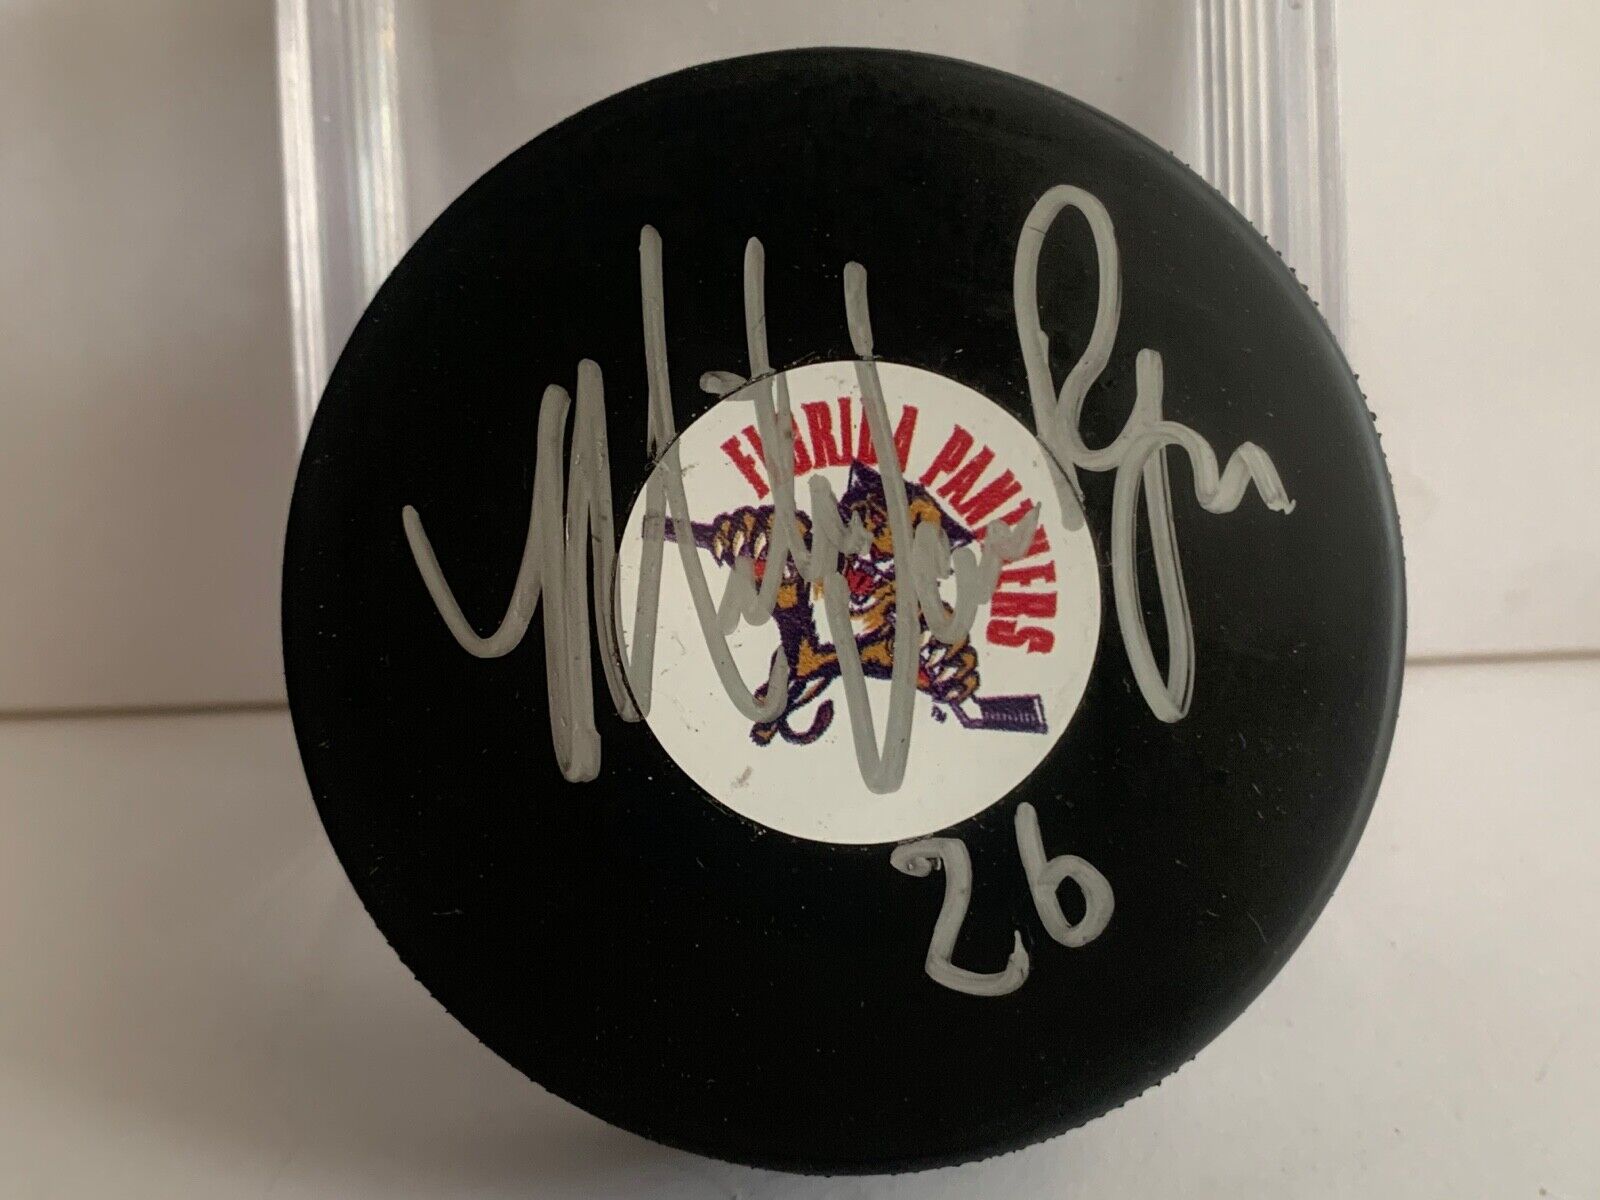 Mike Van Ryan Florida Panthers Autographed Official NHL Hockey Puck